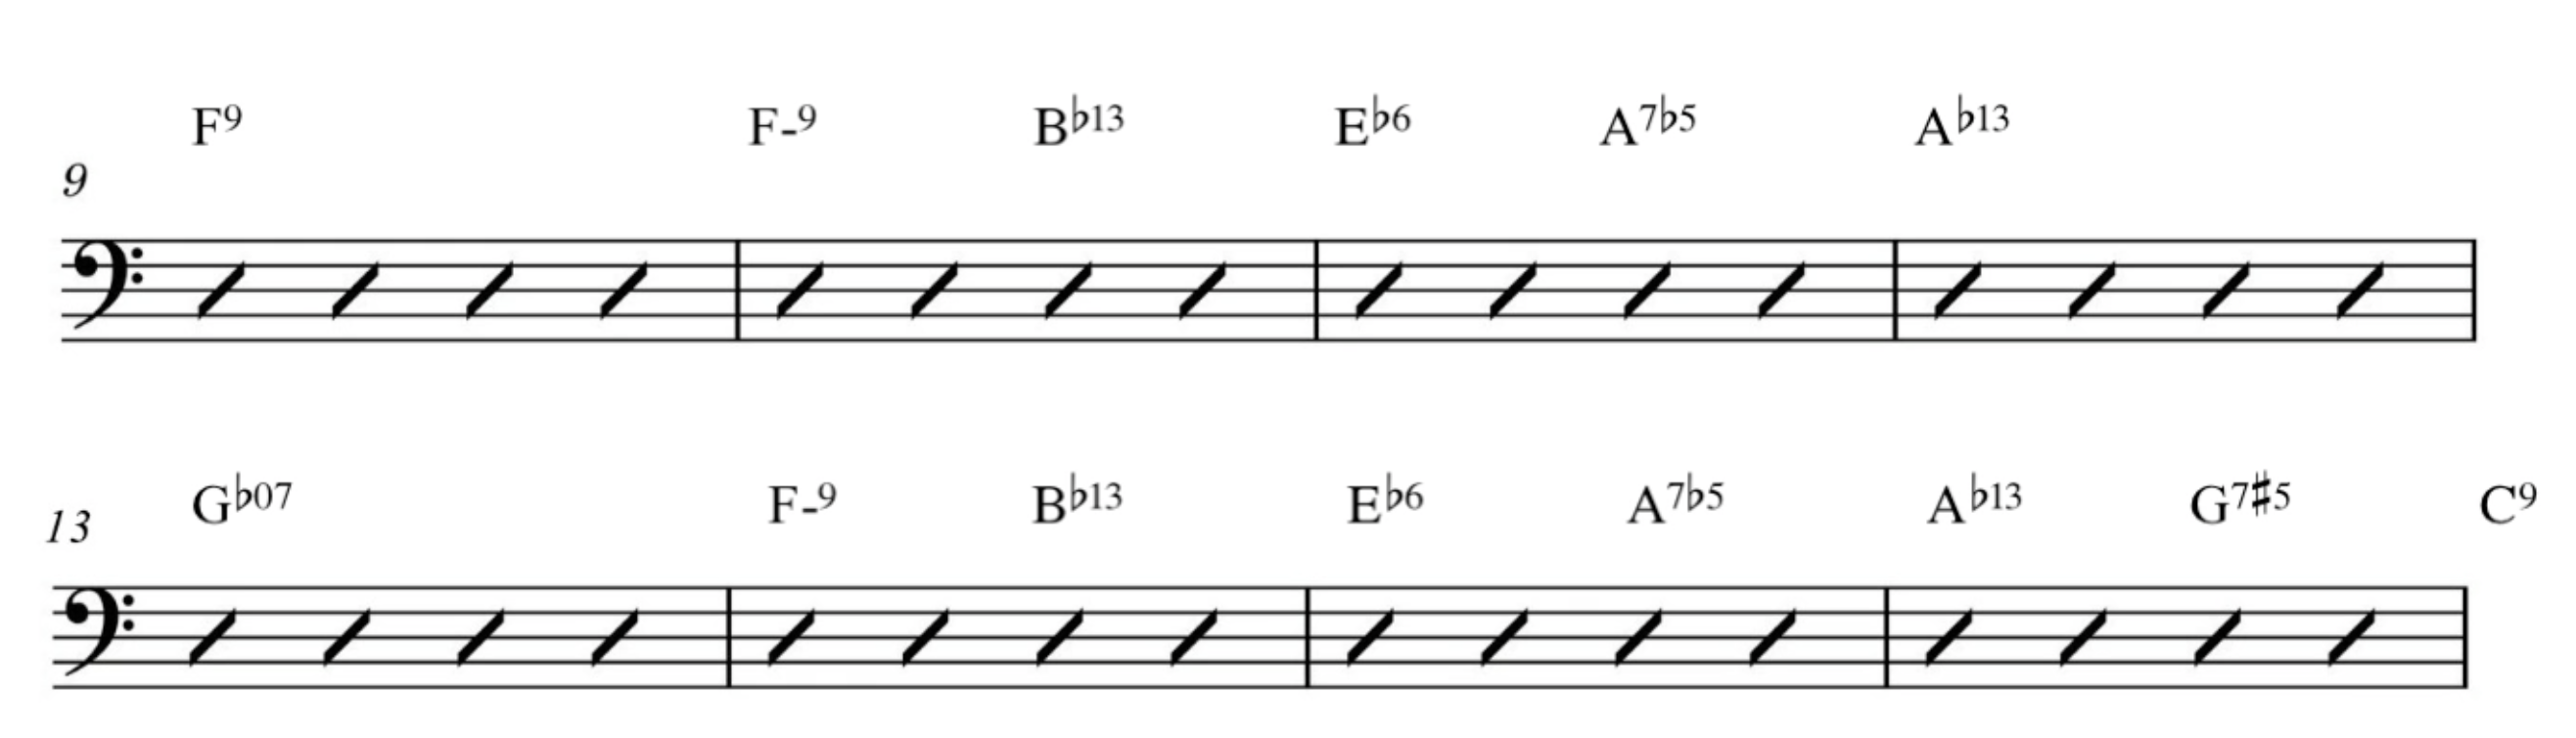 Port Street Blues Chord Substitutions